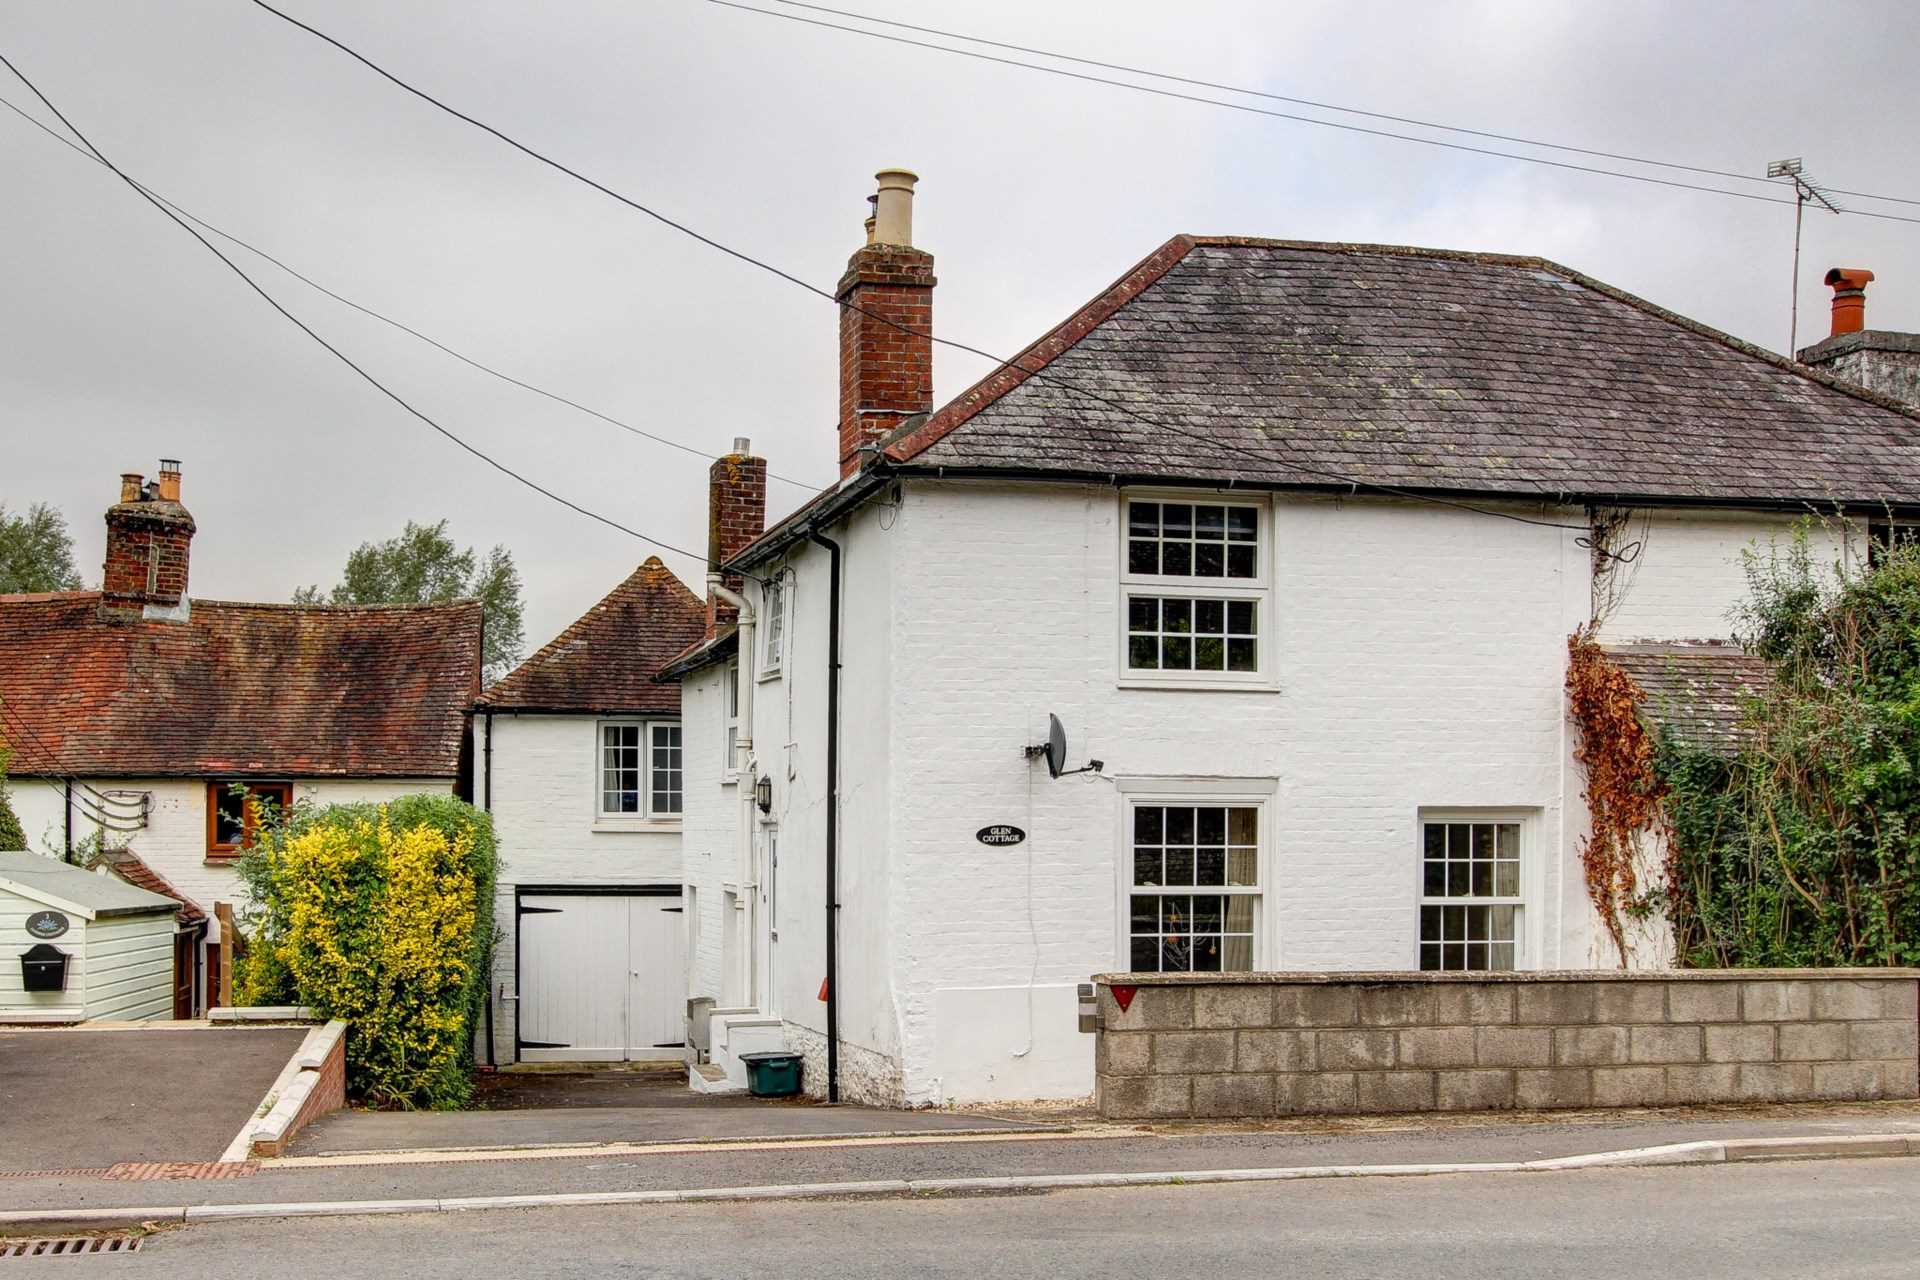 4 bed house for sale in High Street, Spetisbury - Property Image 1